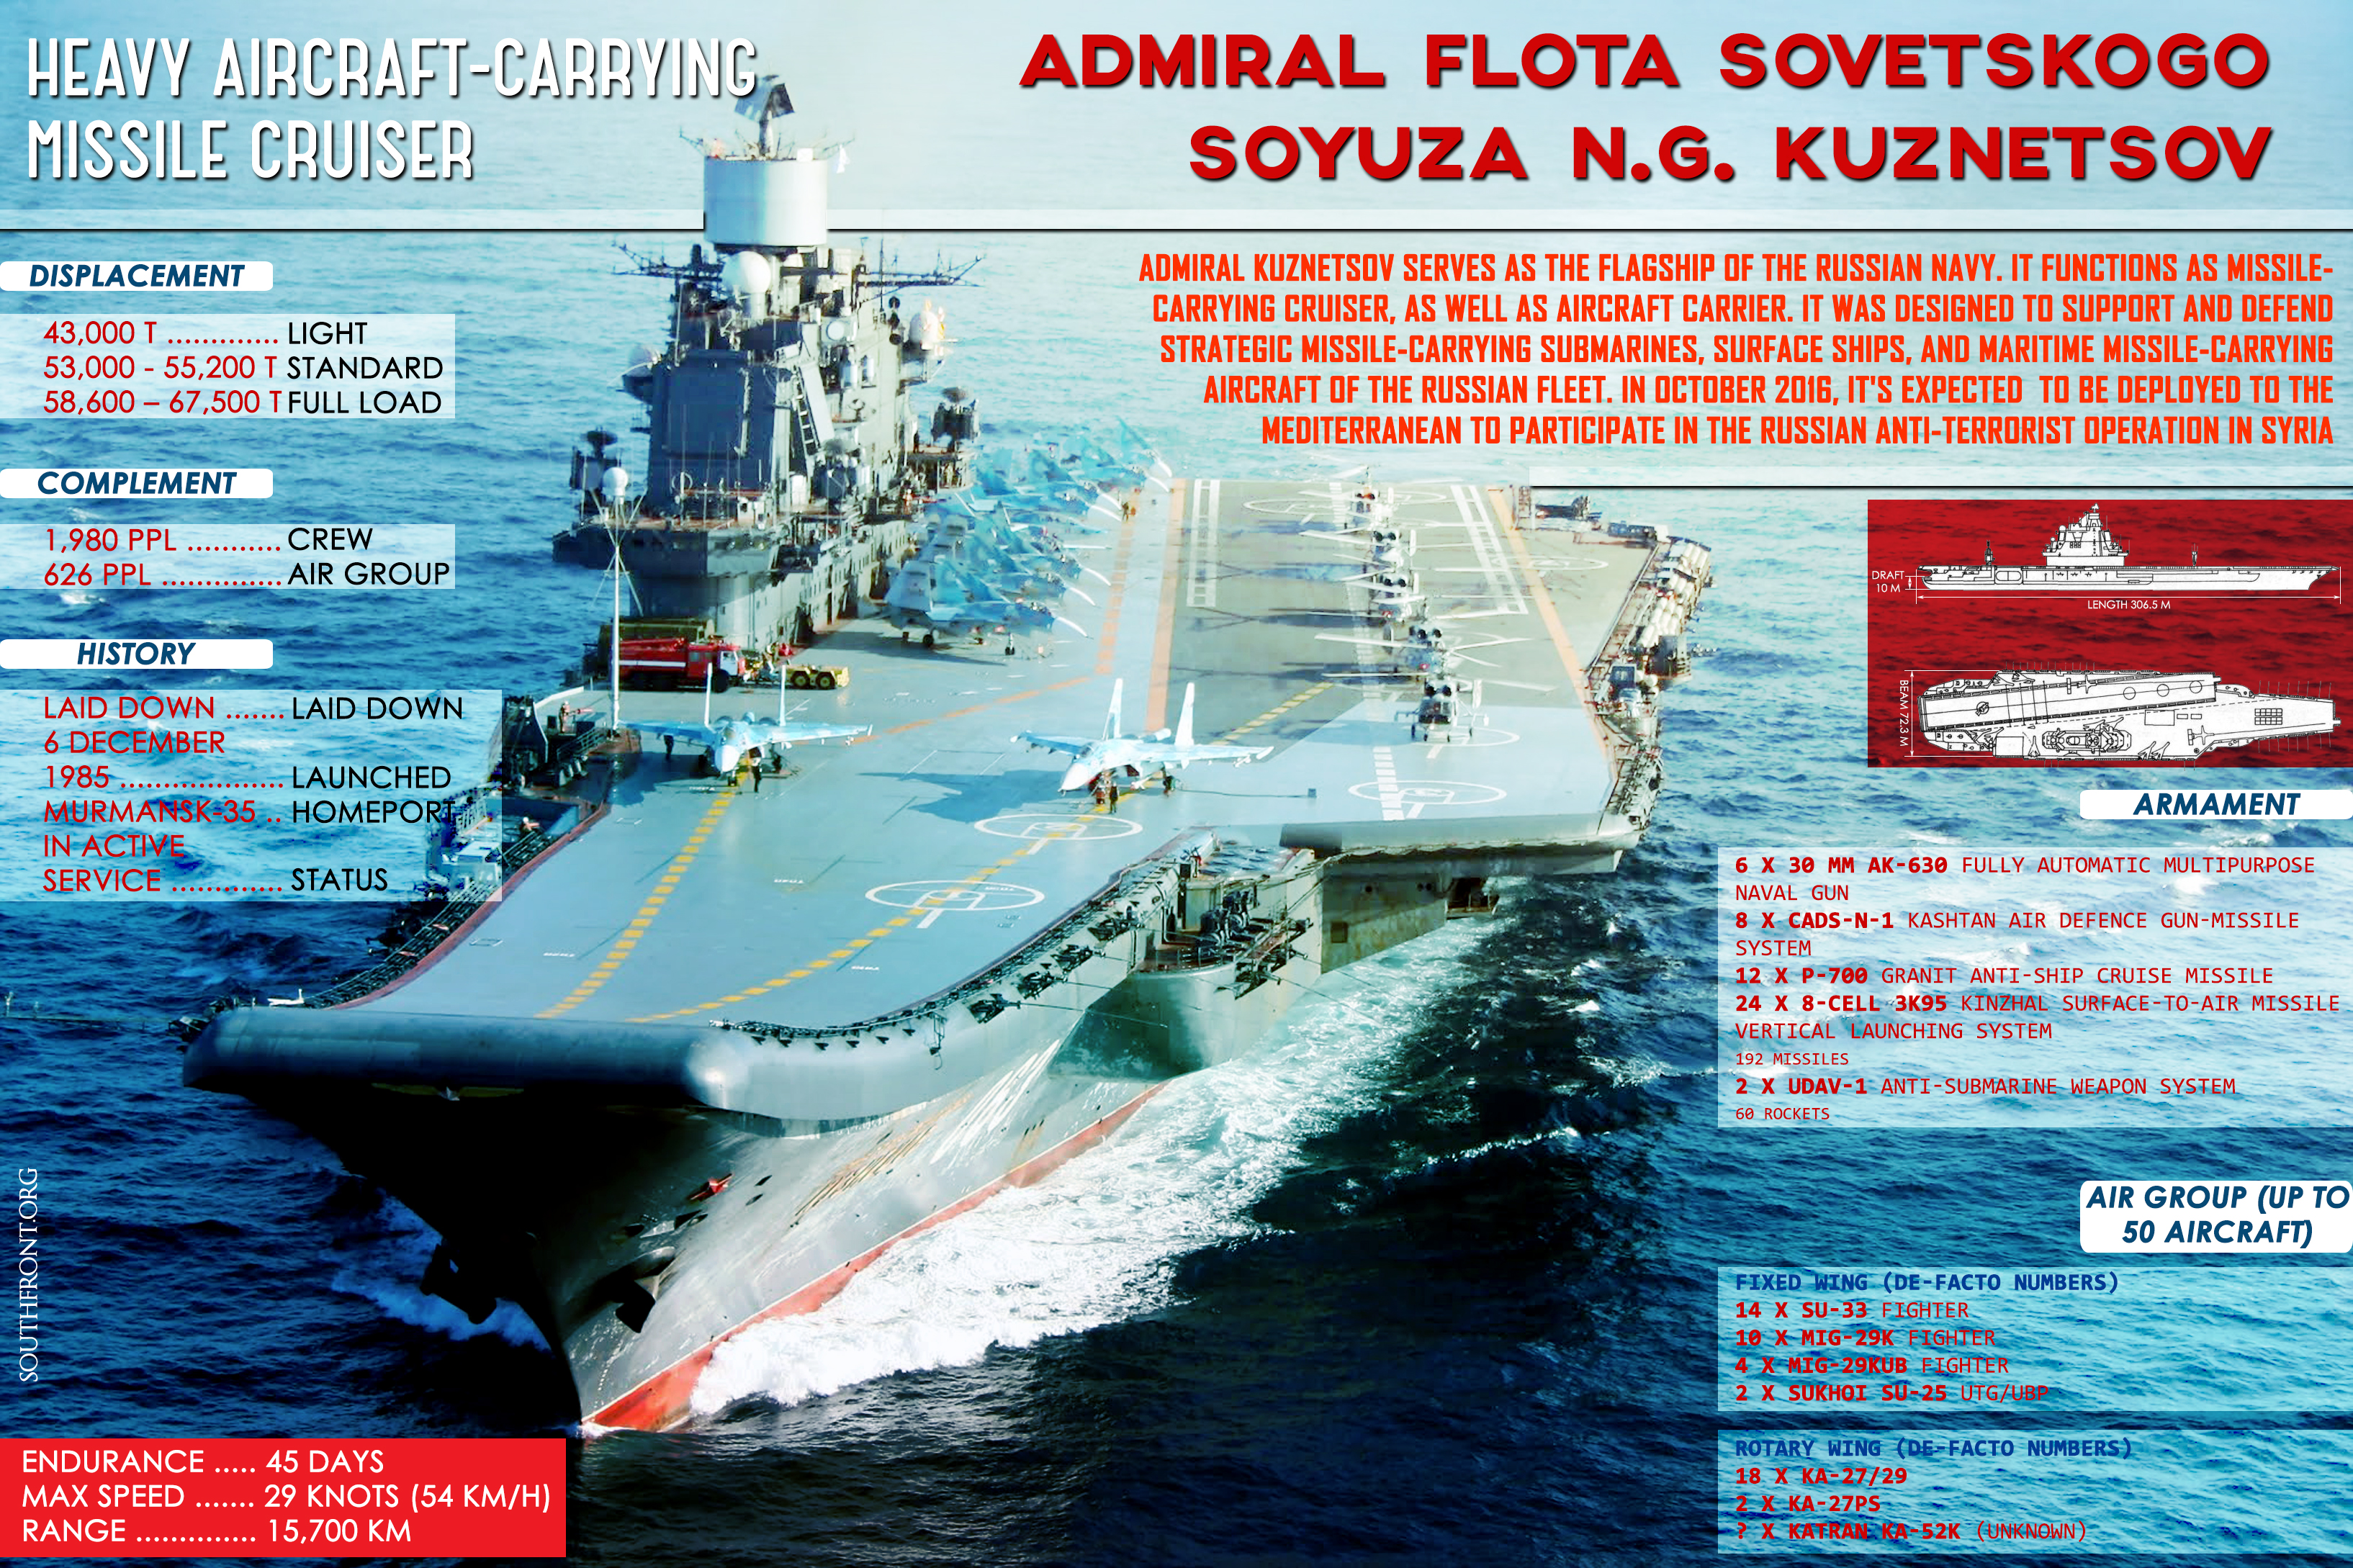 Russia's Heavy Aircraft-Carrying Missile Cruiser 'Admiral Kuznetsov' (Infographics)